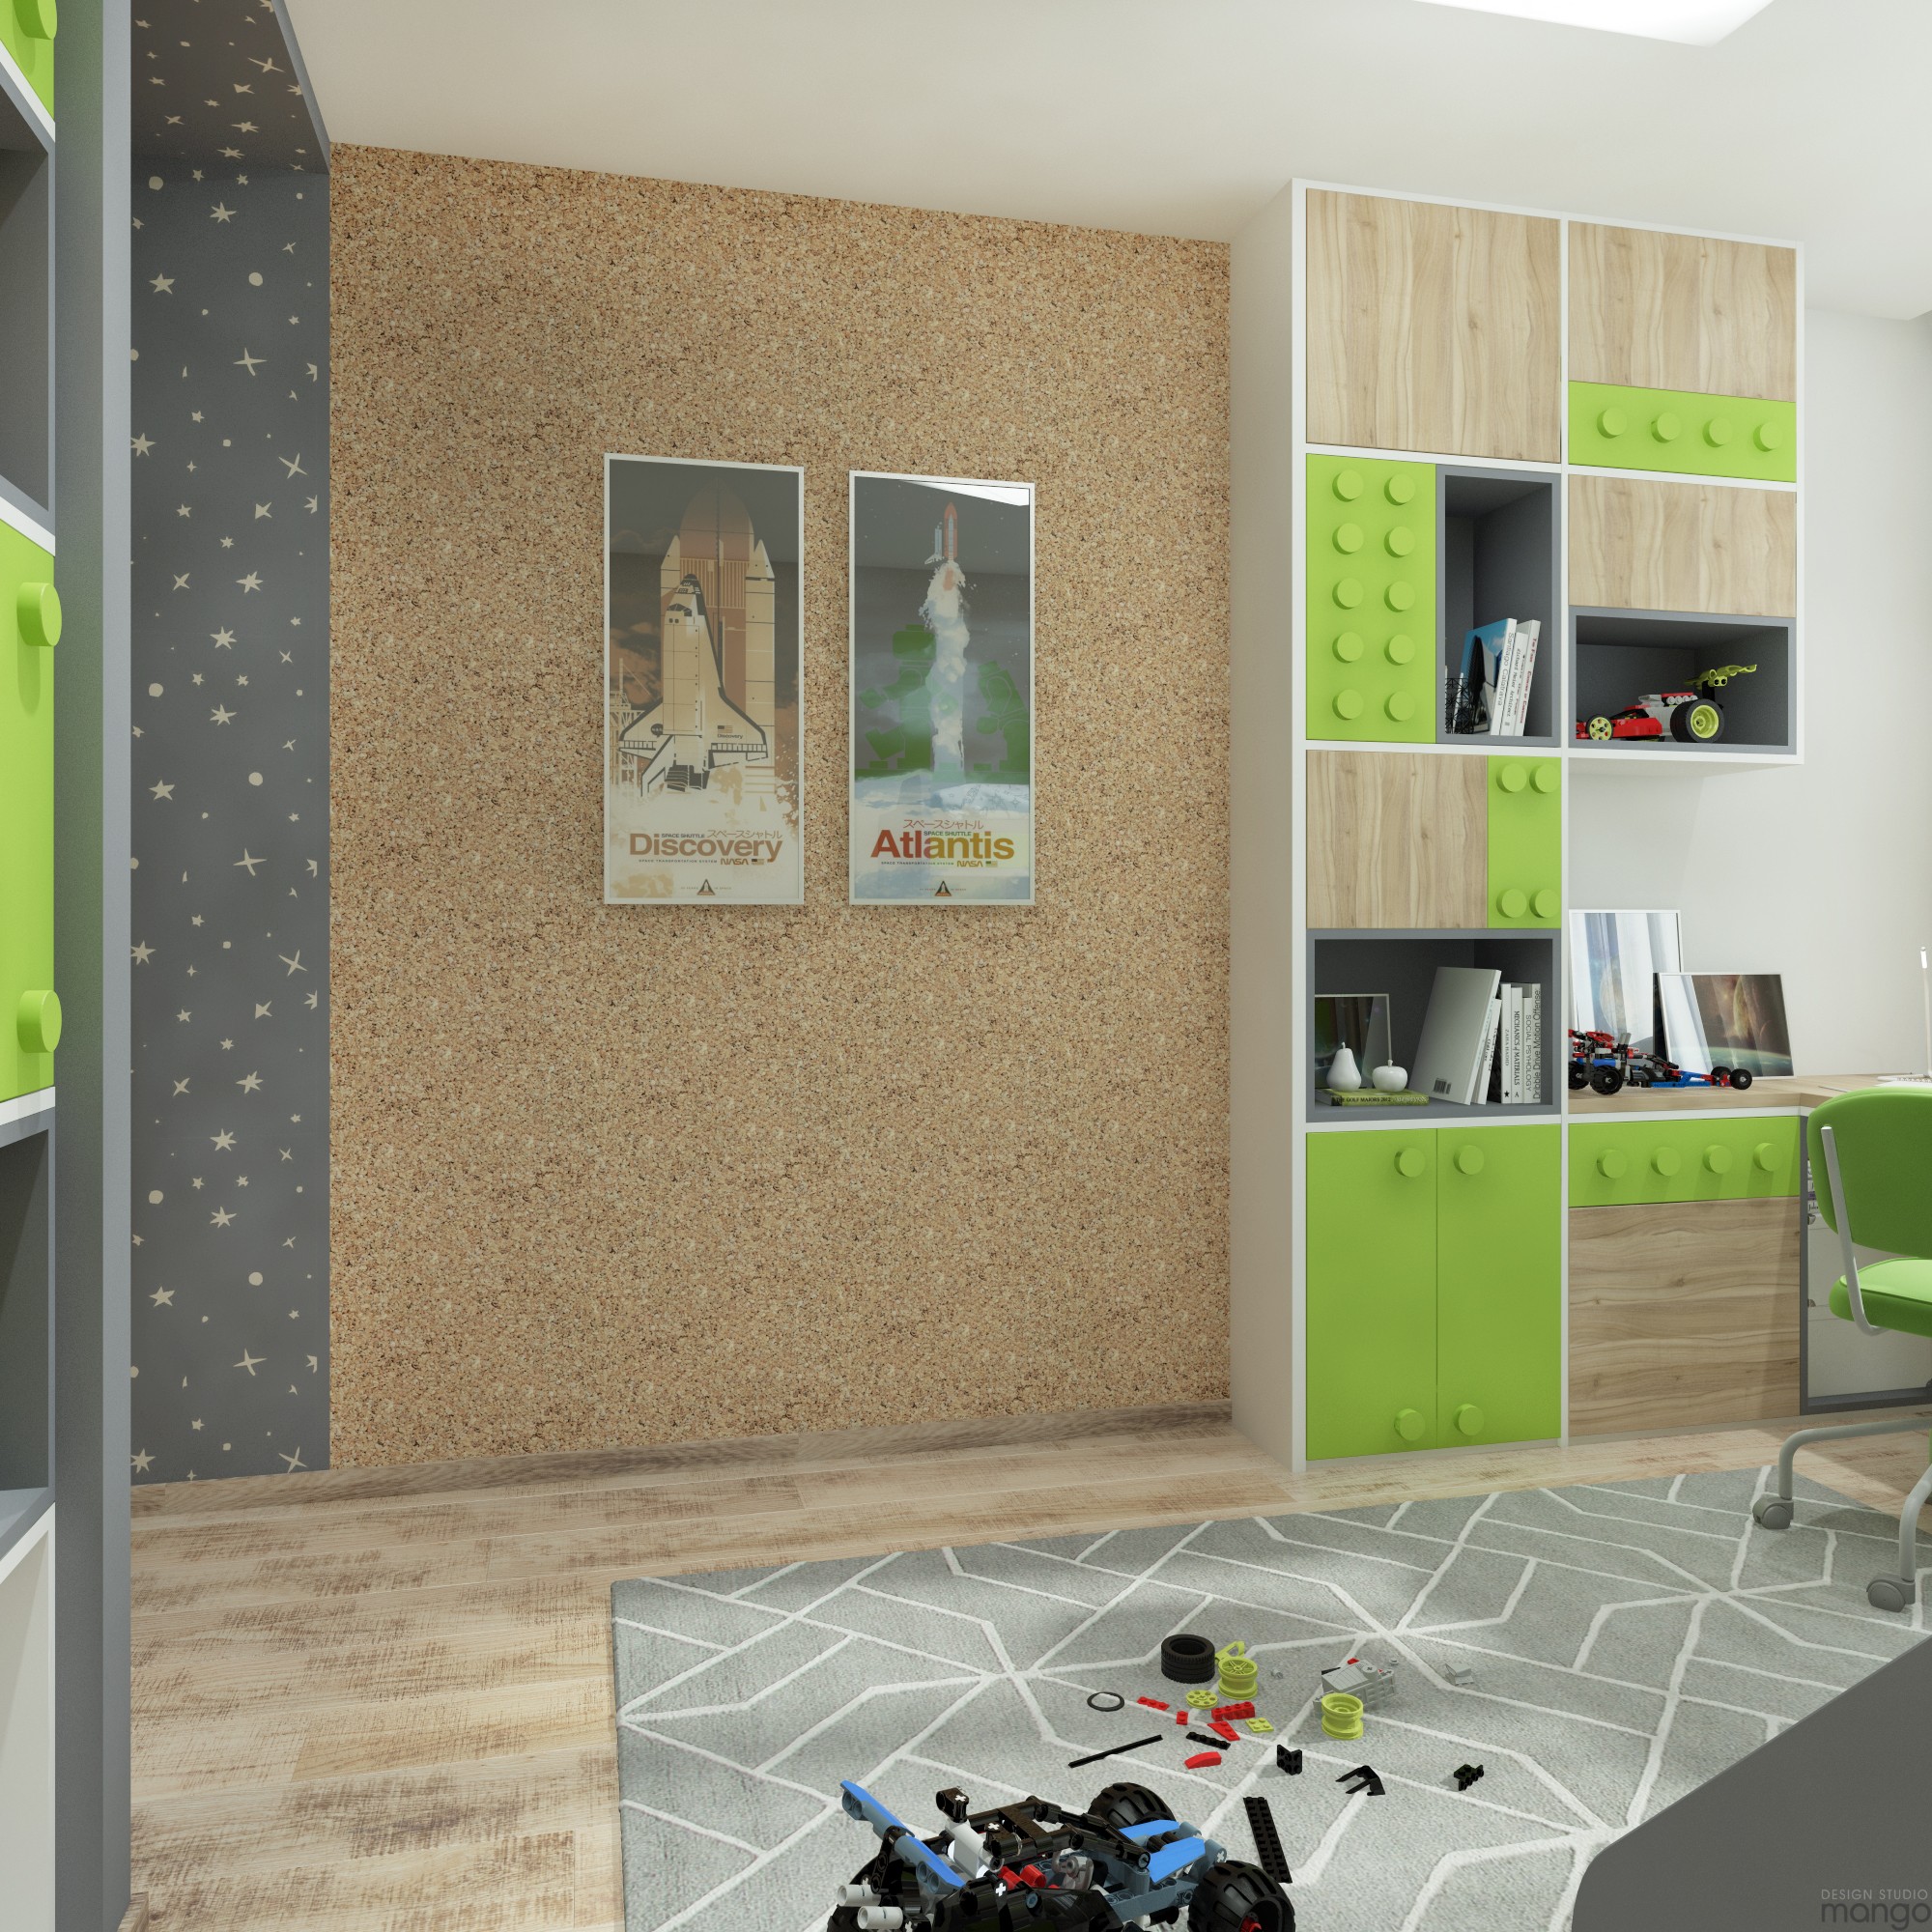 Boys bedroom design "width =" 2000 "height =" 2000 "srcset =" https://mileray.com/wp-content/uploads/2020/05/1588509263_995_Top-Tips-How-To-Create-Kids-Room-Designs-Which-Brimming.jpg 2000w, https: // mileray.com/wp-content/uploads/2016/09/Design-Studio-Mango10-2-150x150.jpg 150w, https://mileray.com/wp-content/uploads/2016/09/Design-Studio-Mango10 -2-300x300.jpg 300w, https://mileray.com/wp-content/uploads/2016/09/Design-Studio-Mango10-2-768x768.jpg 768w, https://mileray.com/wp-content /uploads/2016/09/Design-Studio-Mango10-2-1024x1024.jpg 1024w, https://mileray.com/wp-content/uploads/2016/09/Design-Studio-Mango10-2-696x696.jpg 696w , https://mileray.com/wp-content/uploads/2016/09/Design-Studio-Mango10-2-1068x1068.jpg 1068w, https://mileray.com/wp-content/uploads/2016/09/ Design-Studio-Mango10-2-420x420.jpg 420w "sizes =" (maximum width: 2000px) 100vw, 2000px